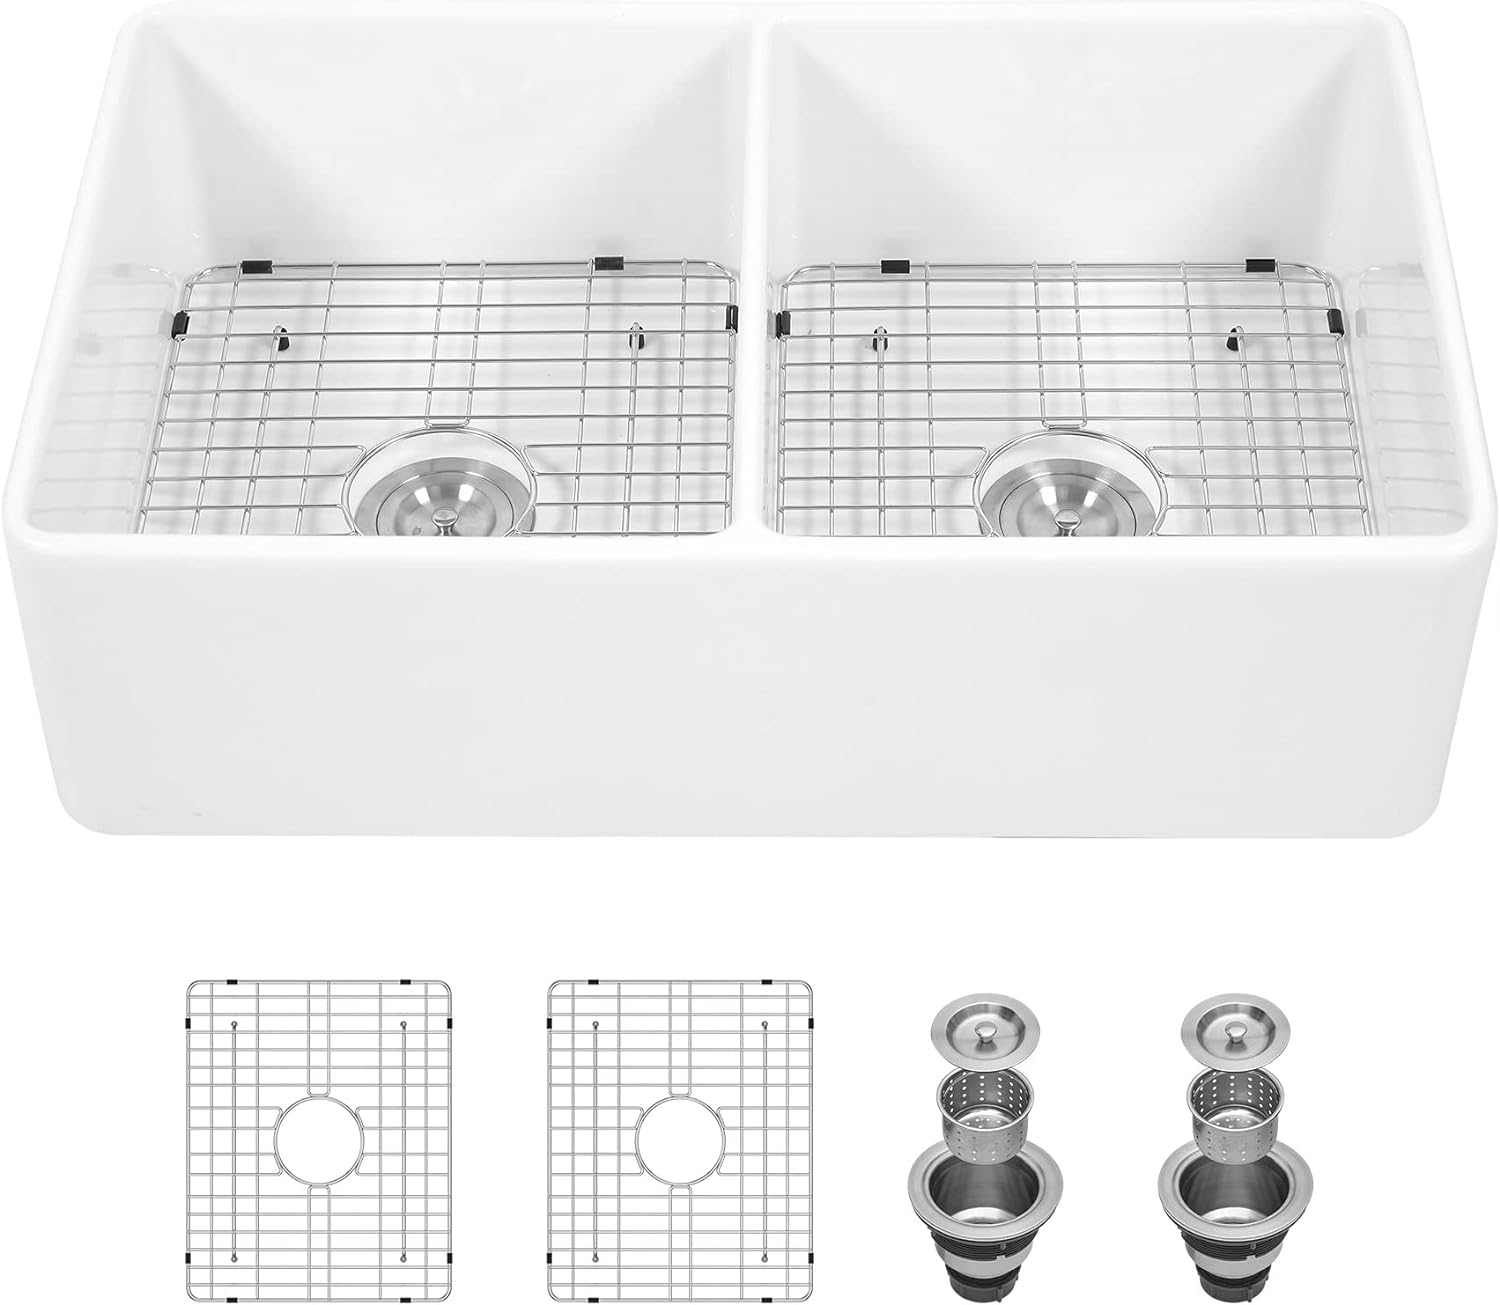 Lordear 33x20 Inch Farmhouse Sinks Double Basin Pure White Fireclay Porcelain Ceramic Apron Front Farm Sink 33 Inch 50/50 Double Kitchen Sink | Apron Front Kitchen Sink, big sale, Ceramic Kitchen Sink, Farmhouse Kitchen Sink, Kitchen, Kitchen Sink, Kitchen Sinks, Undermount Kitchen Sink | Lordear